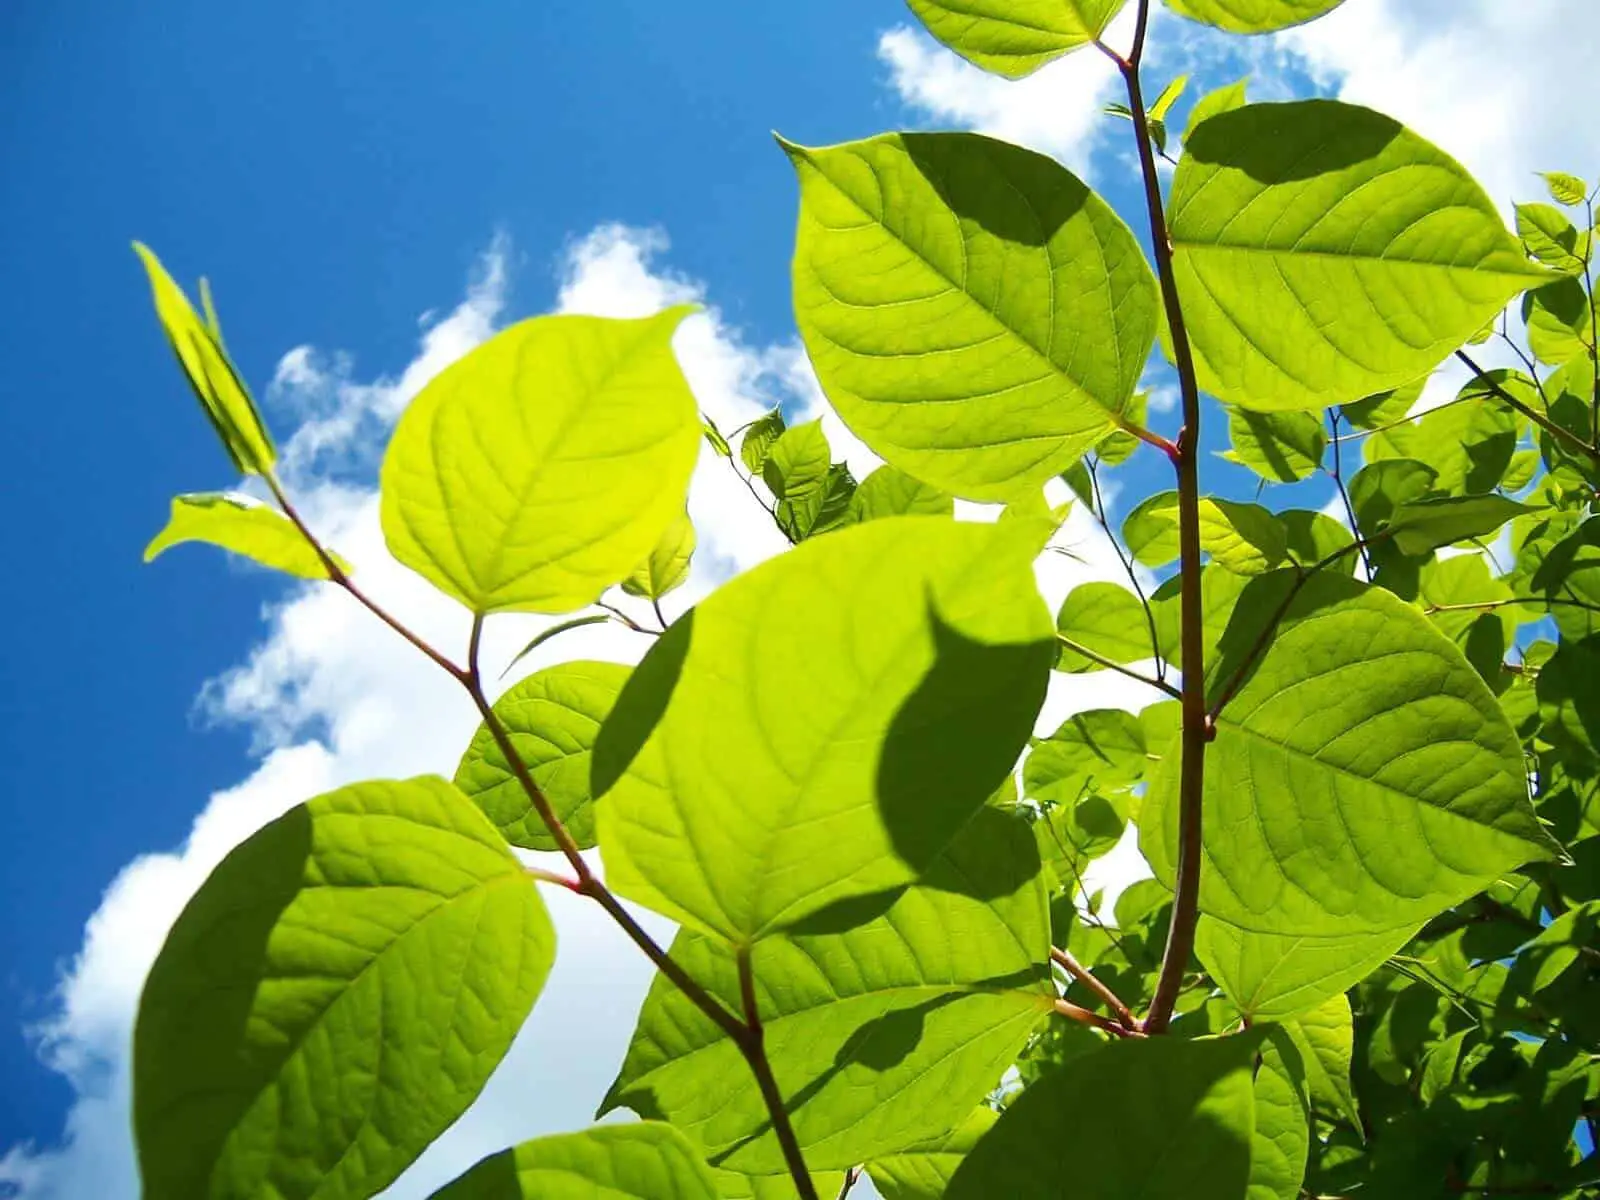 Japanese knotweed in summer and its growth during the warmth of summer